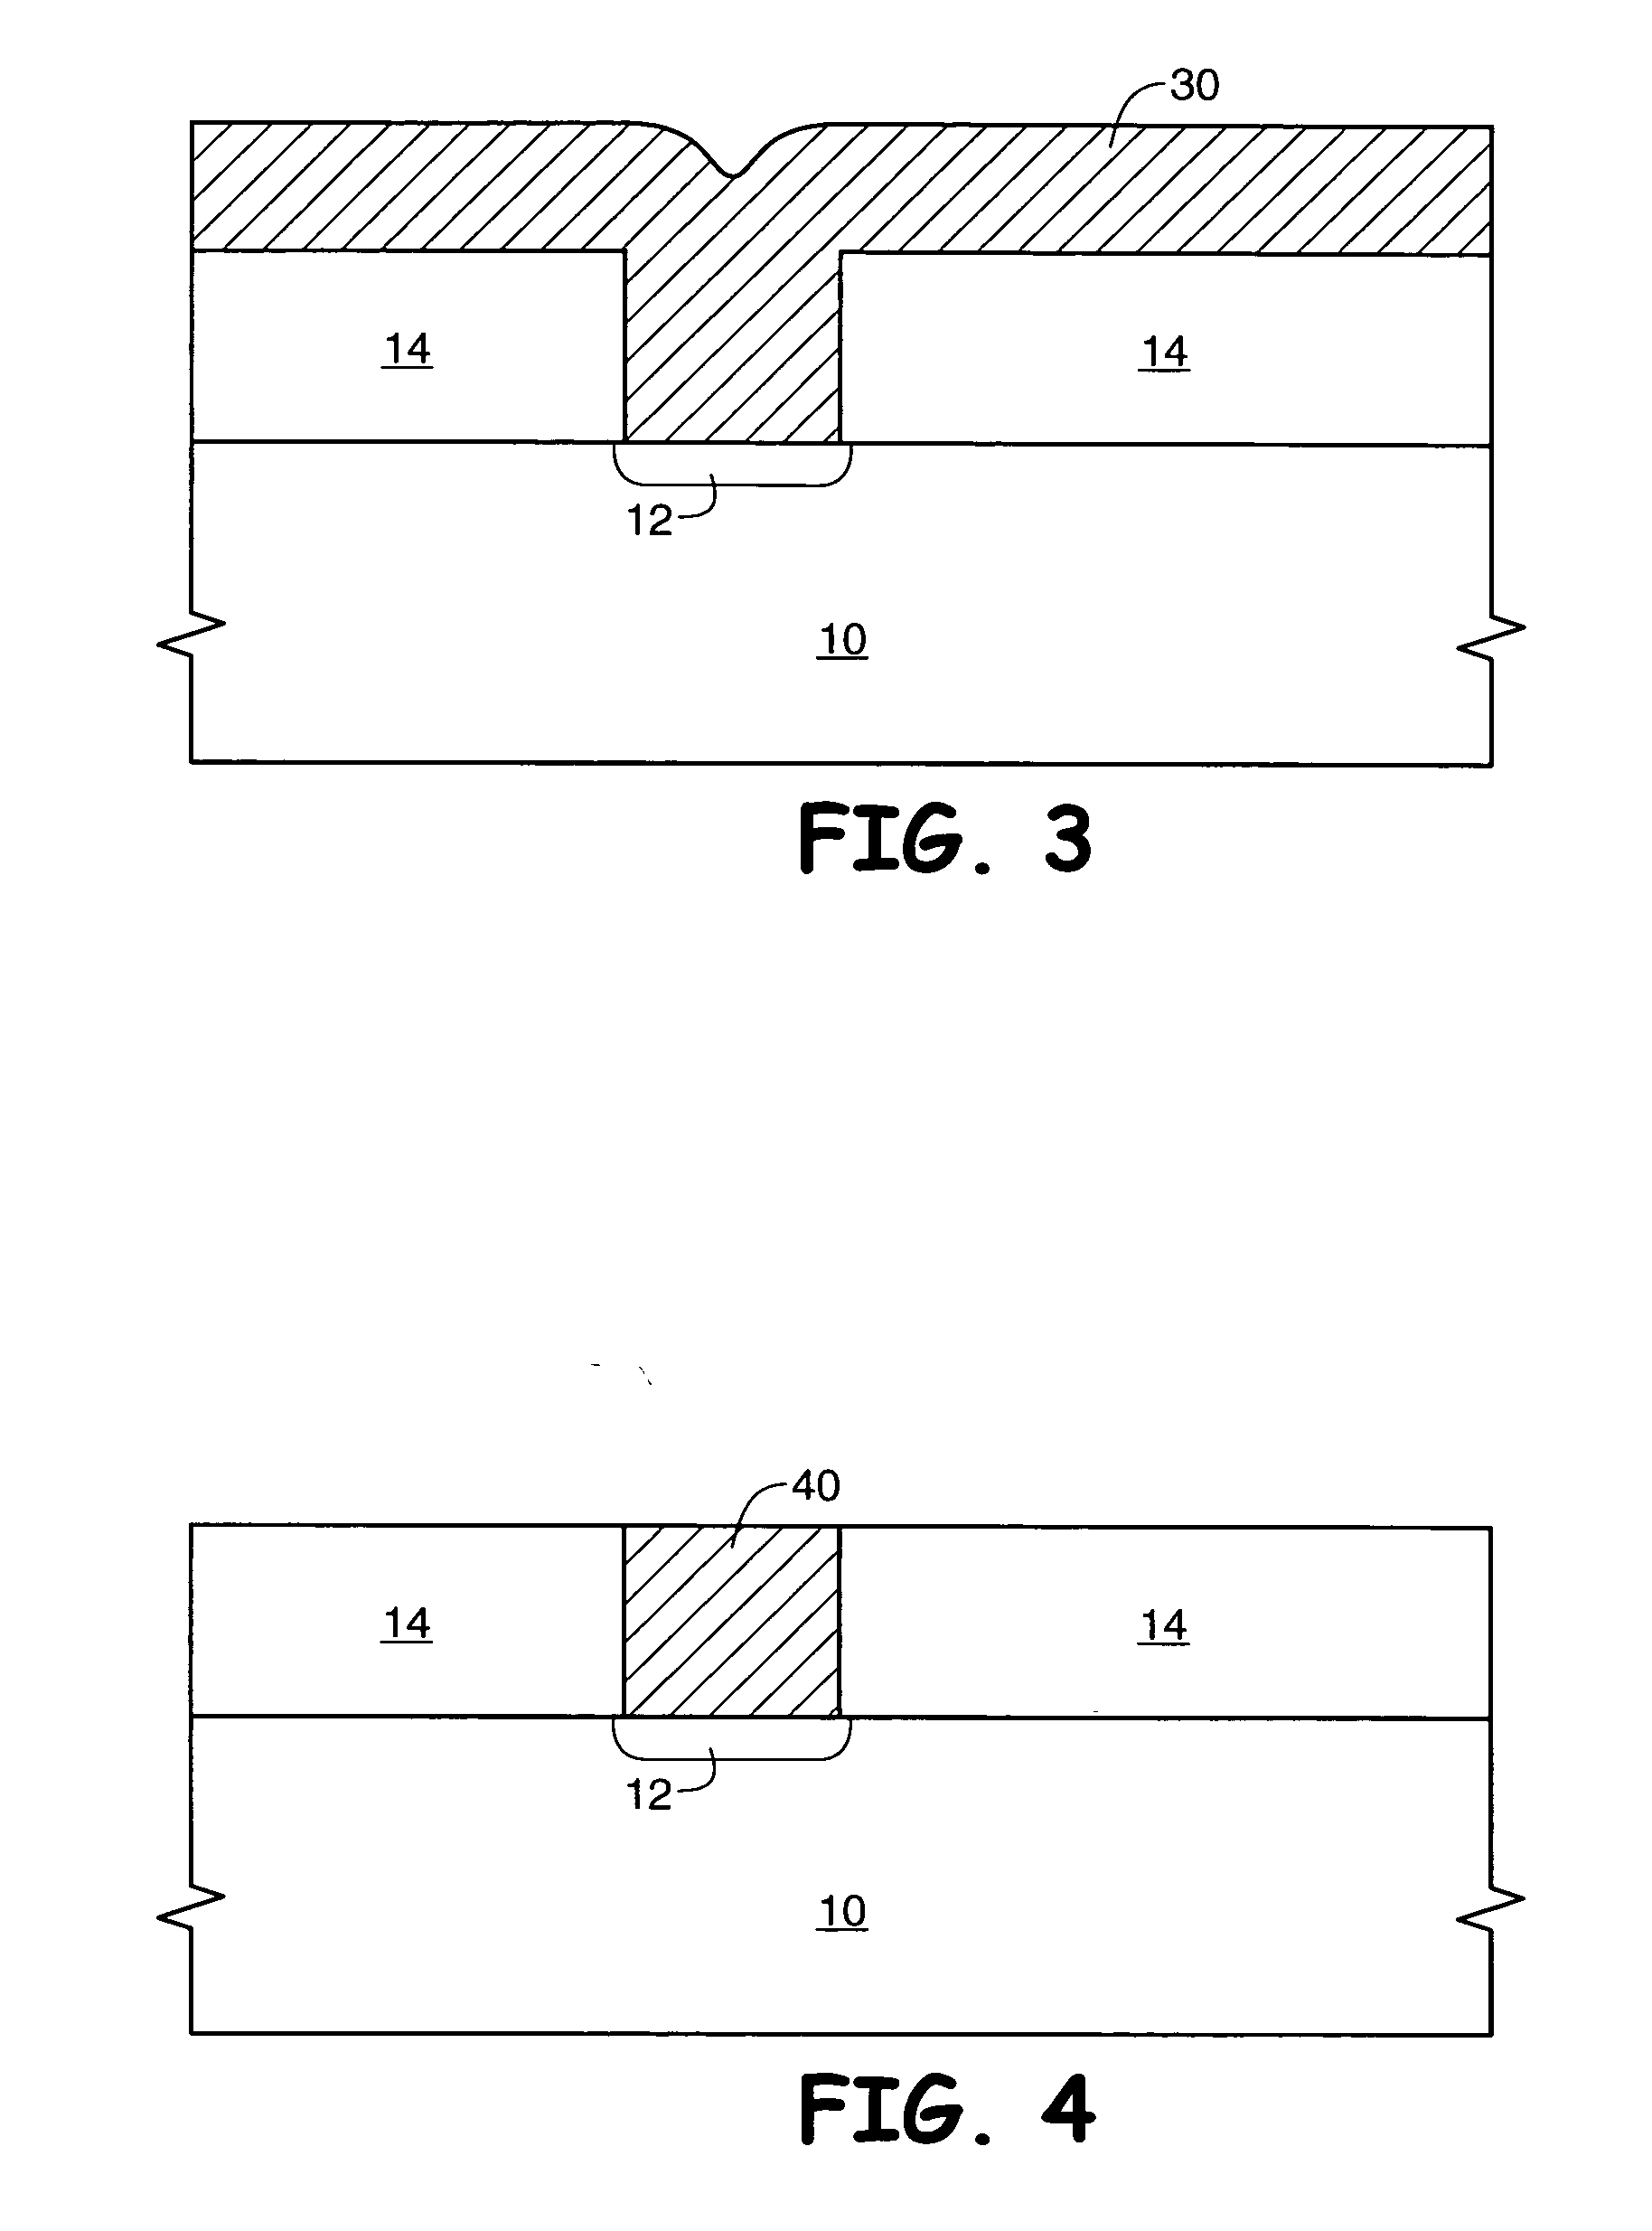 Nucleation method for atomic layer deposition of cobalt on bare silicon during the formation of a semiconductor device